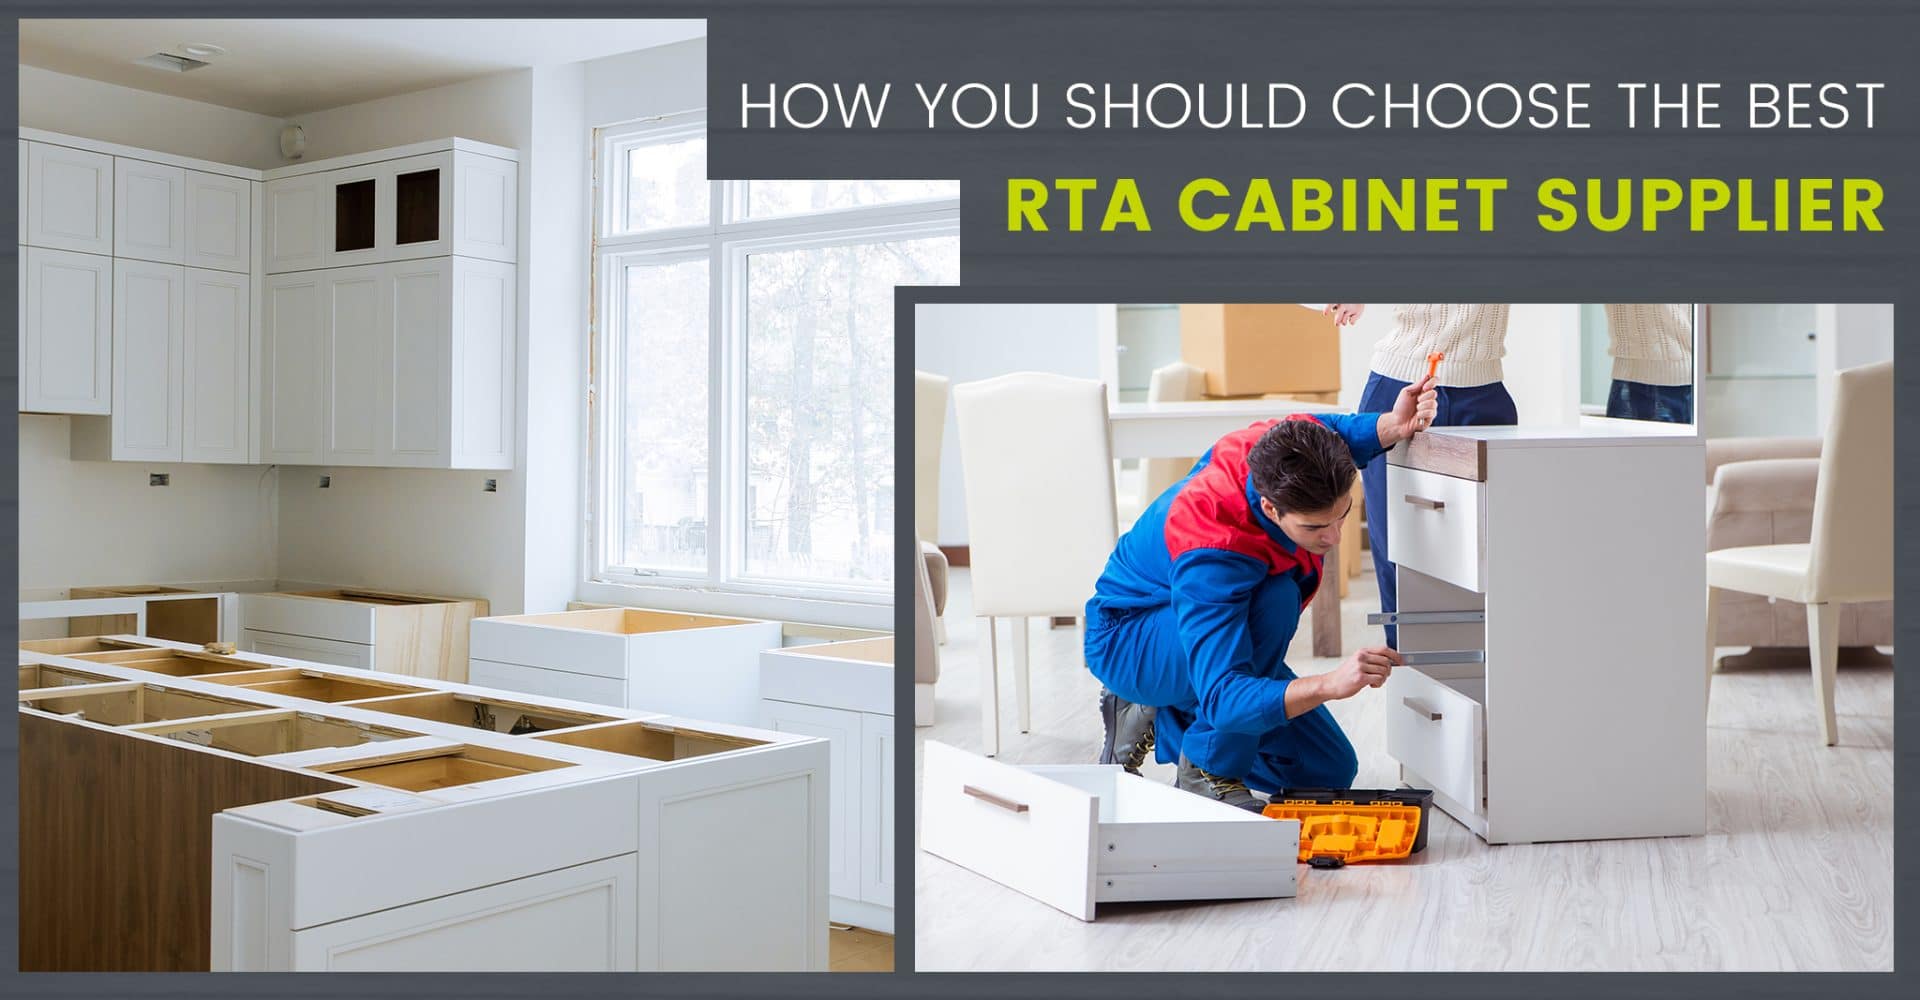 How You Should Choose the Best RTA Cabinet Supplier